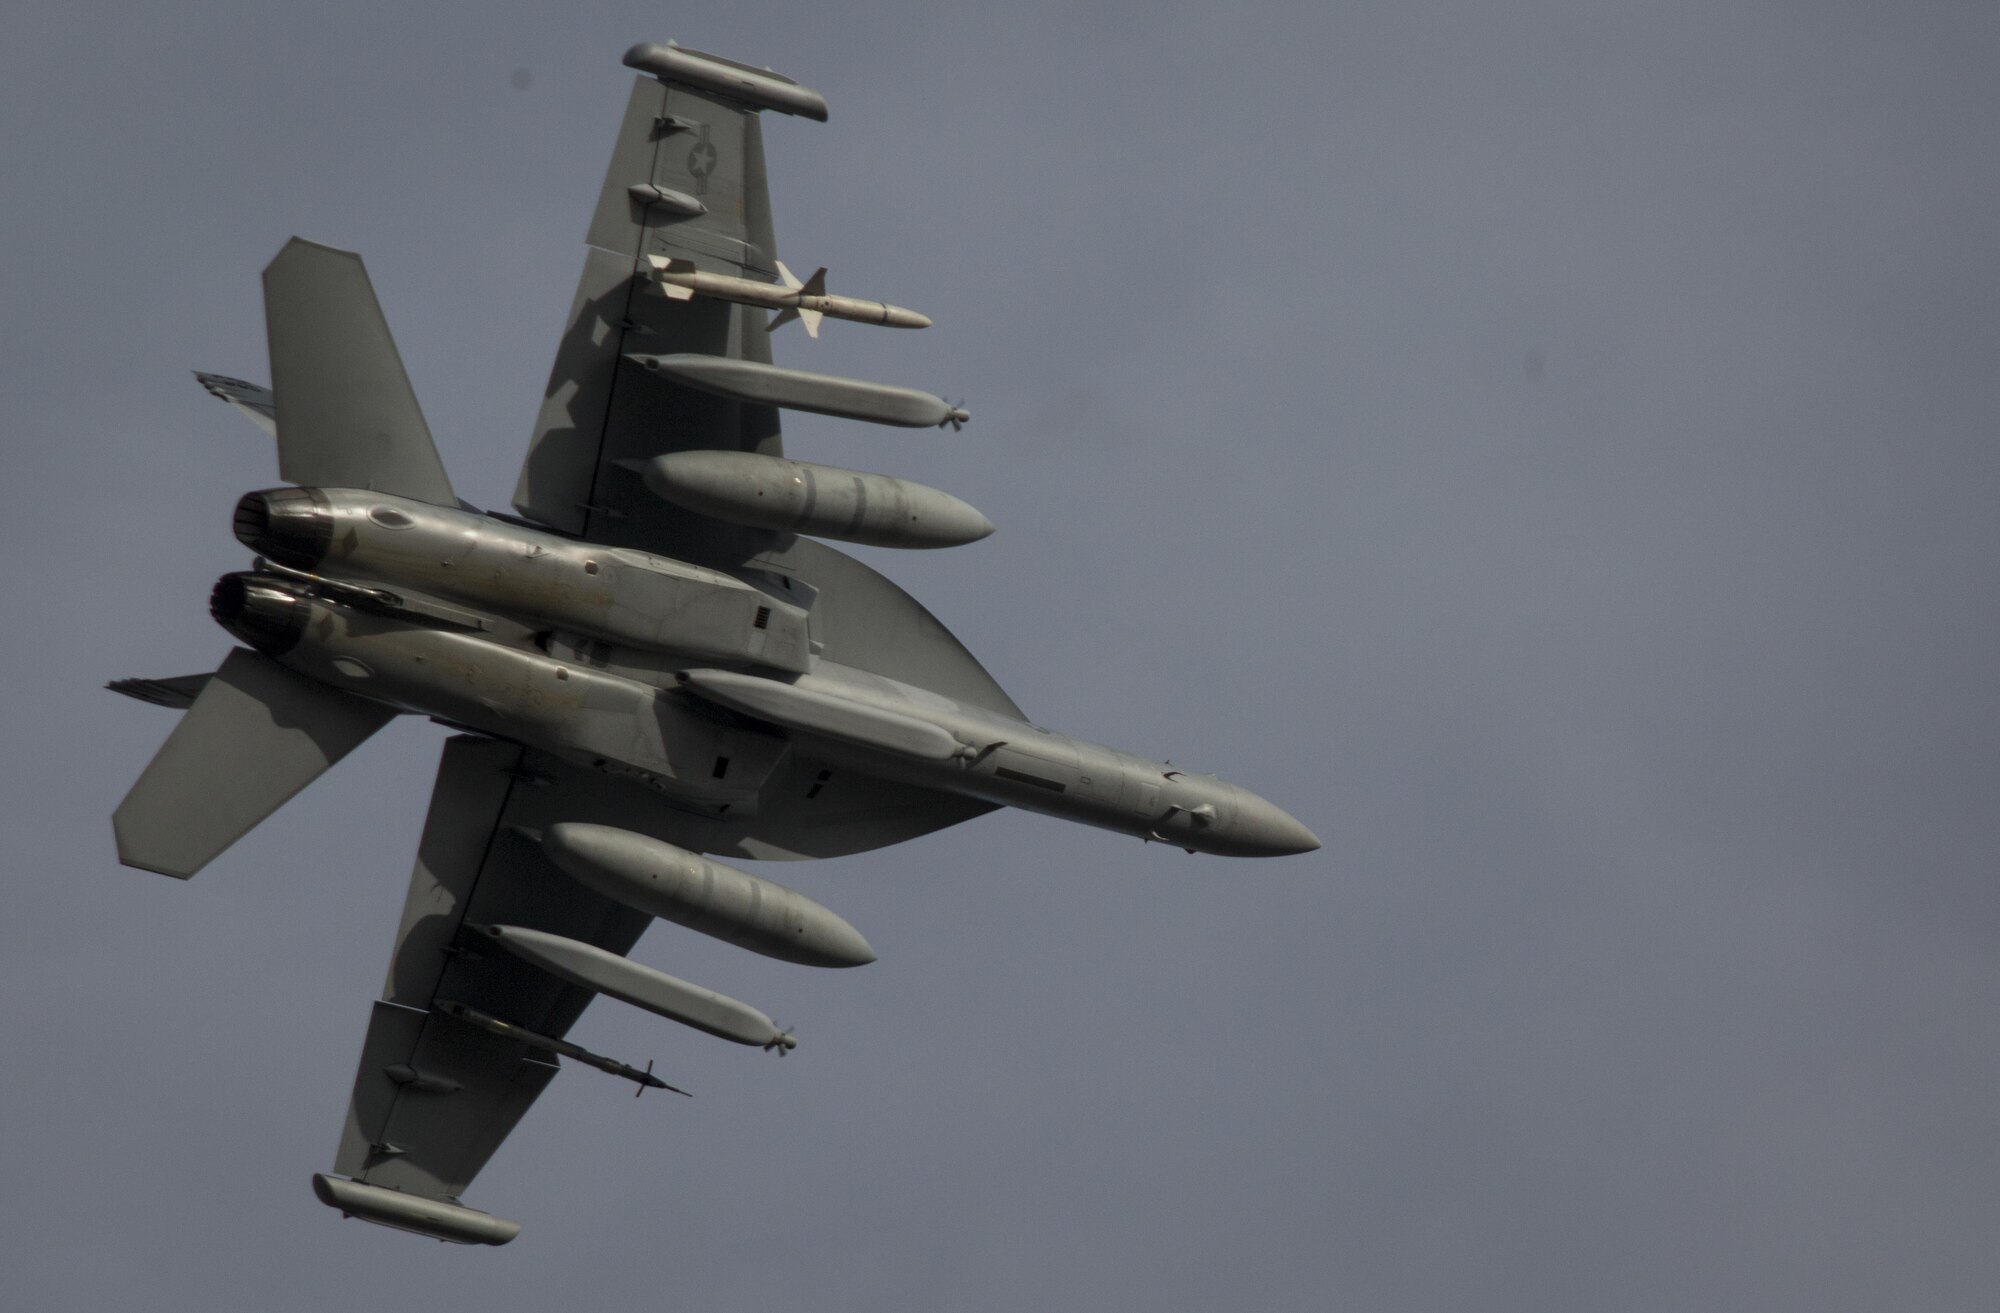 A U.S. Navy EA-18G Growler, fly through the skies above Joint Base Elmendorf-Richardson, Alaska, for exercise Northern Edge 2017, May 2, 2017. This exercise is Alaska’s largest and premier joint training exercise designed to practice operations, techniques and procedures as well as enhance interoperability among the services. Approximately 6,000 U.S. military personnel and more than 200 military aircraft from the Marine Corps, Navy, Air Force, Army and Coast Guard are involved. 